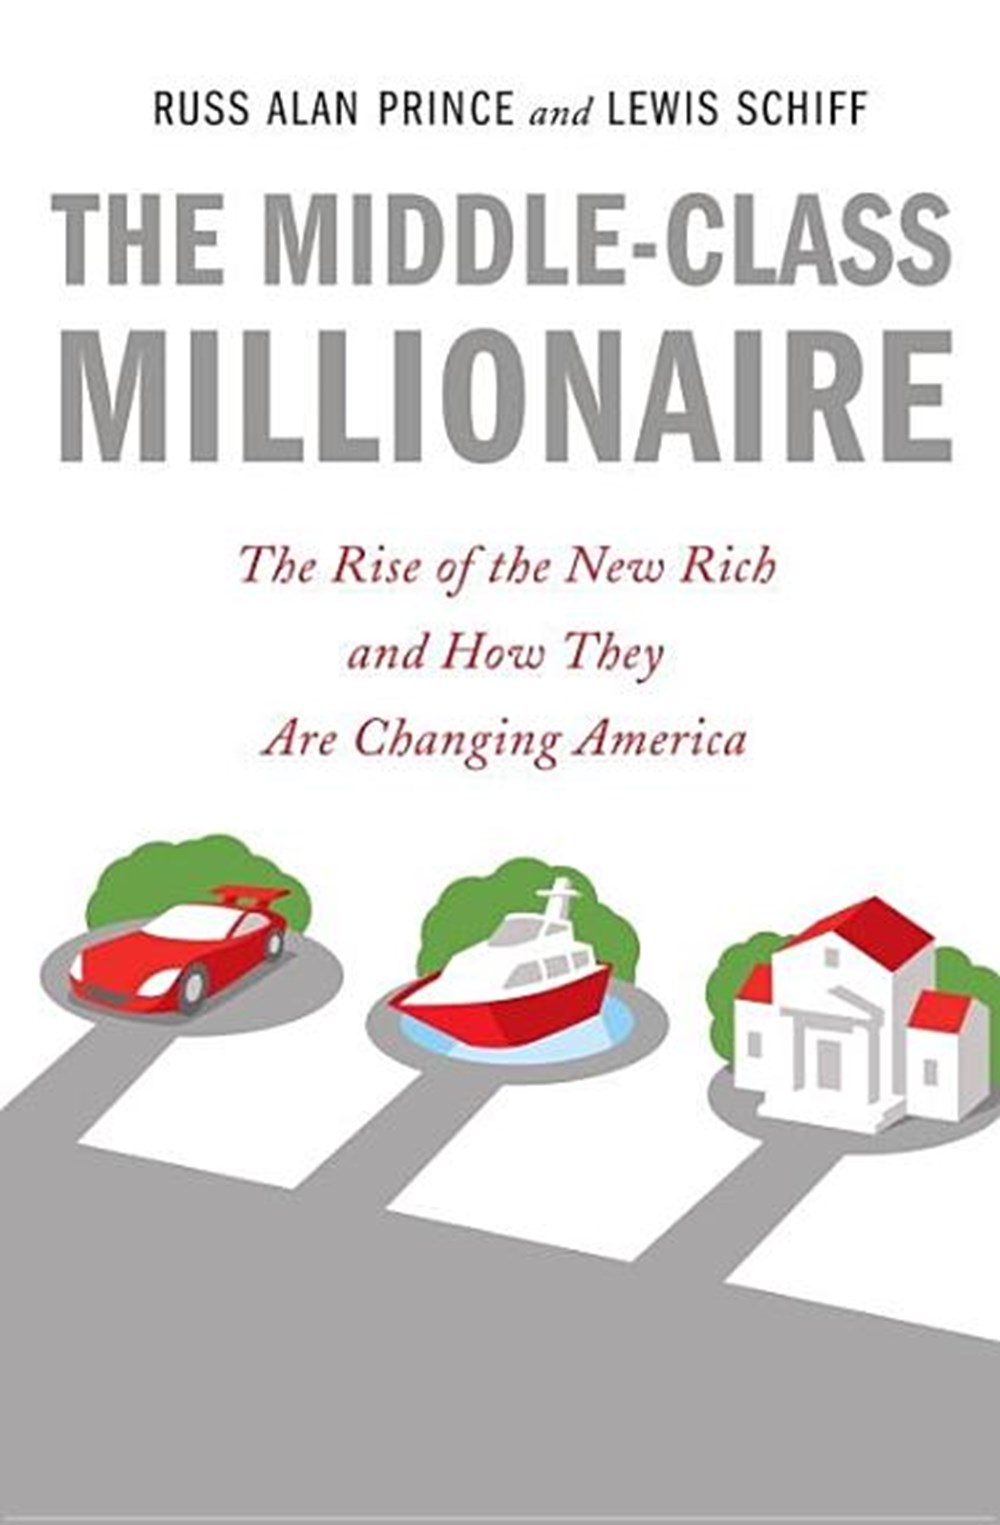 Middle-Class Millionaire: The Rise of the New Rich and How They Are Changing America